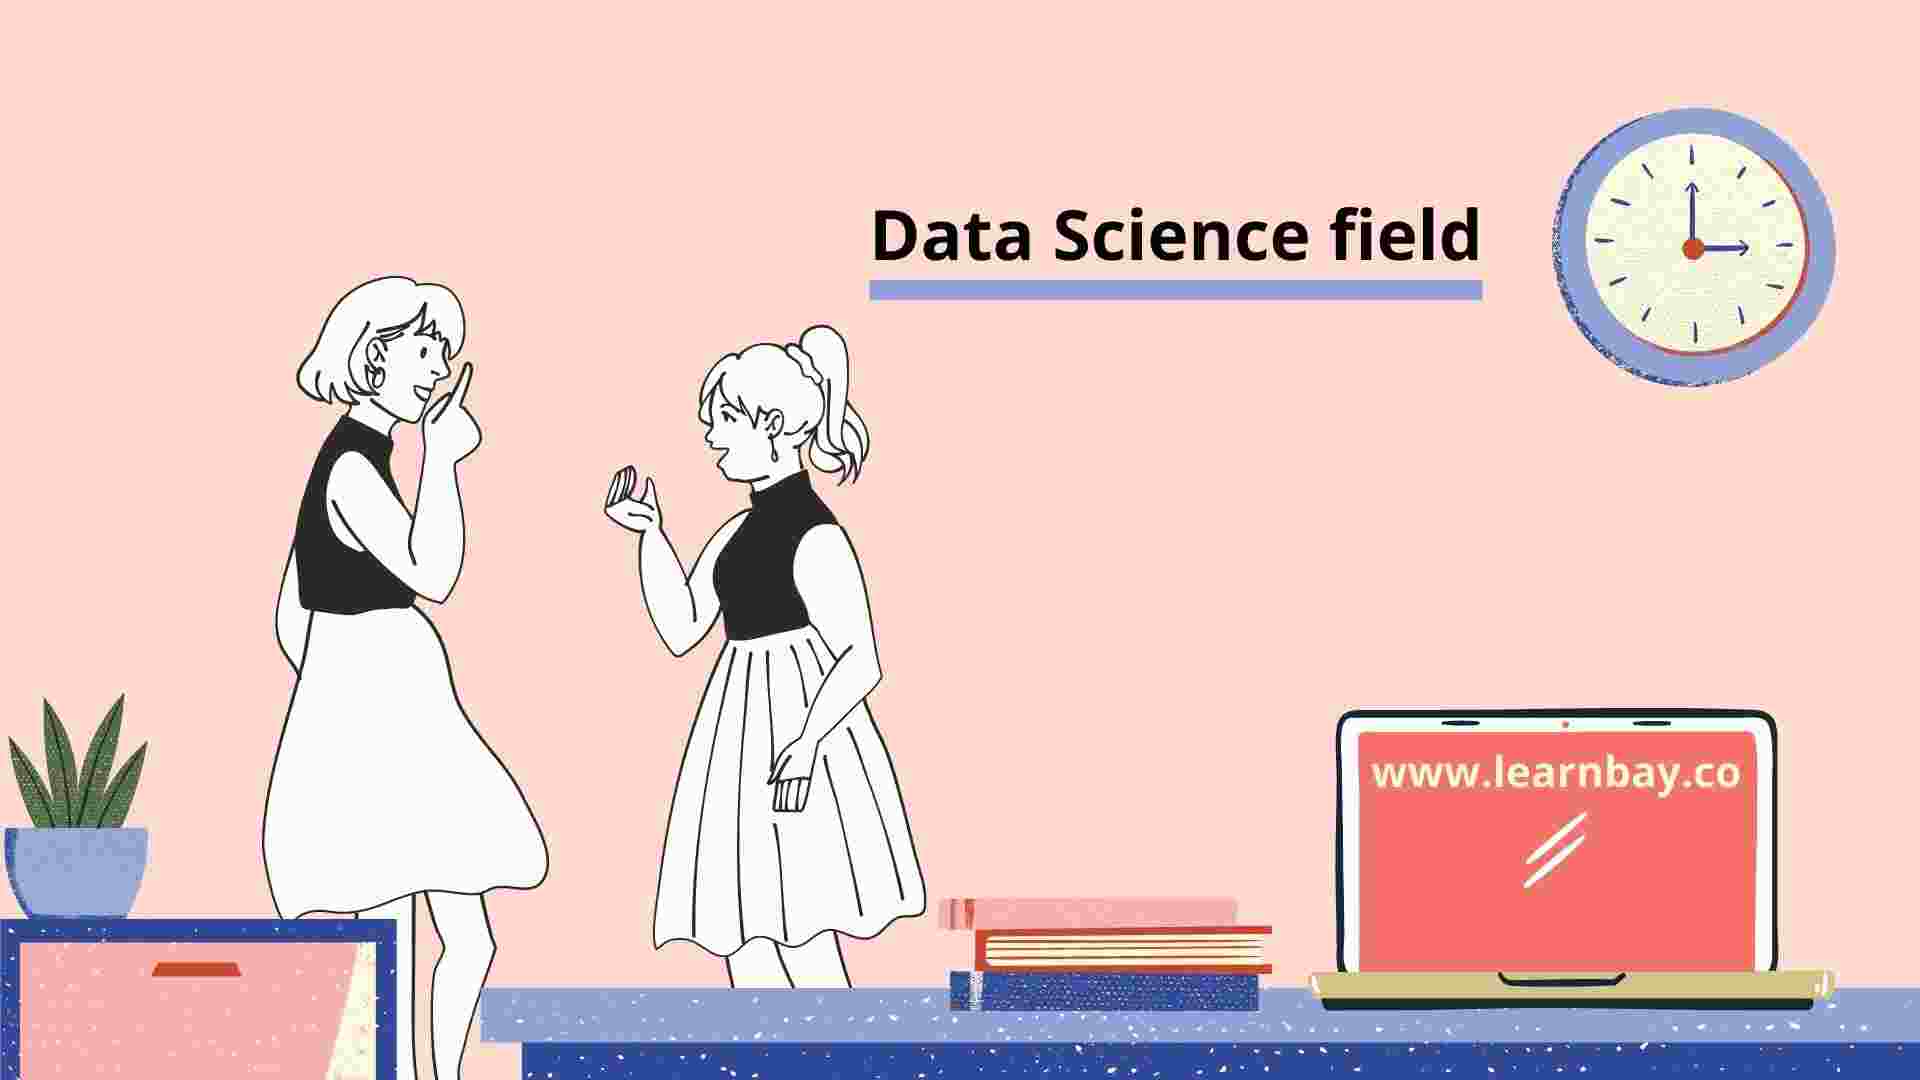 An illustration of two girls discussing different types of data science fields.